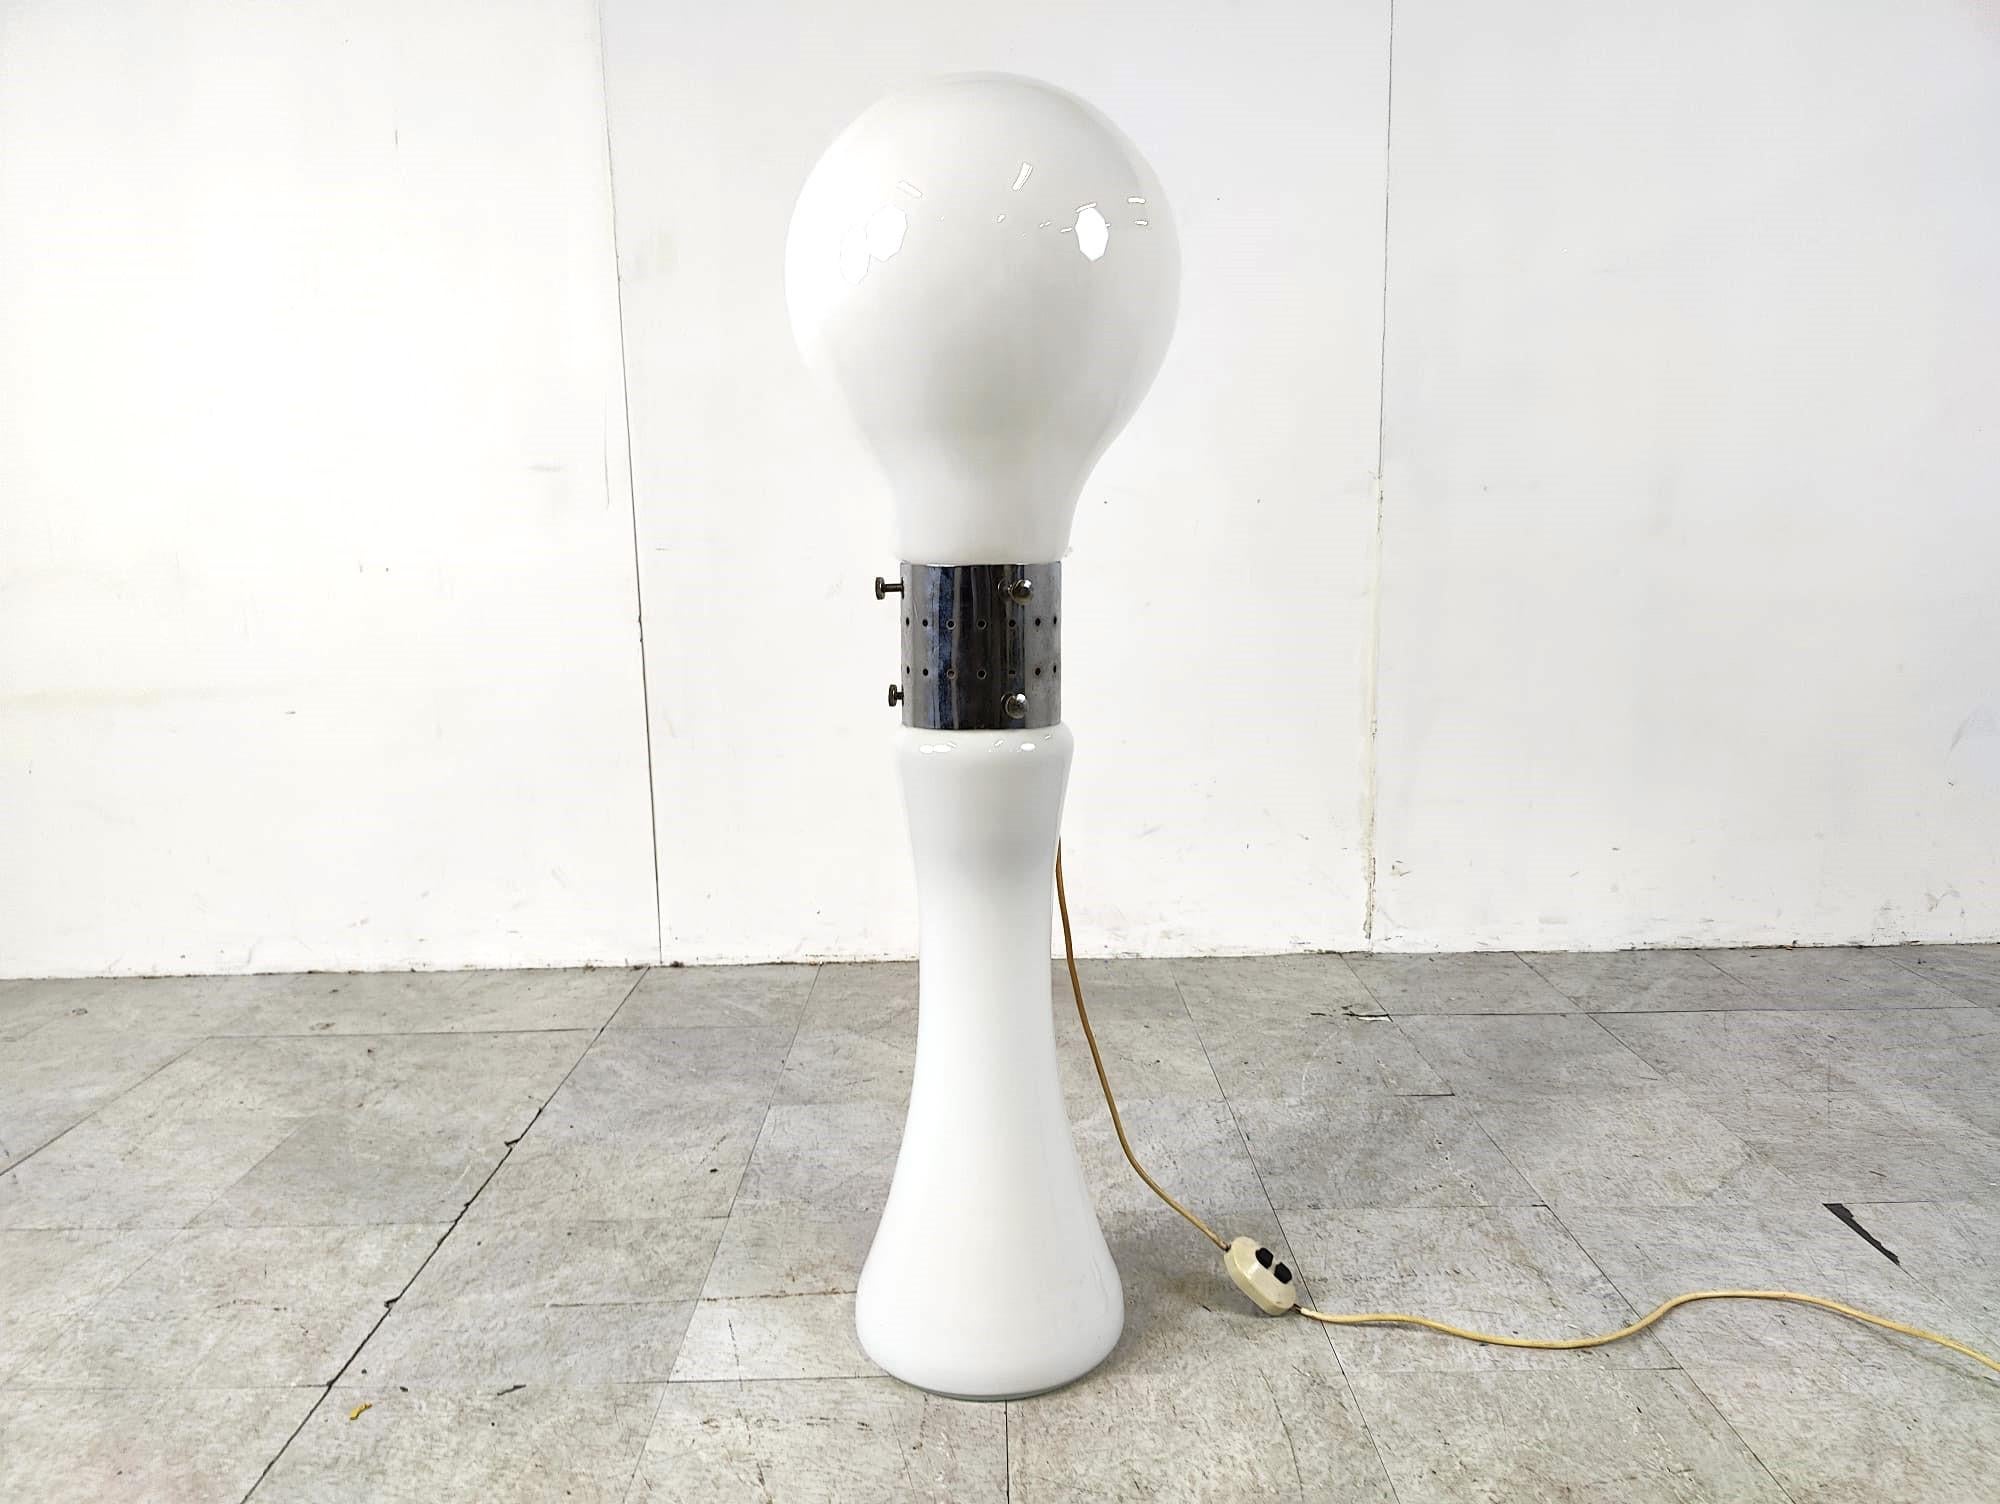 Timeless floor lamp model 'birillo' designed by Carlo Nason for AV Mazzega.

Beautiful space age floor lamp with a white glass bulb shaped shade. The entire lamp is made out of murano glass with chromed center pieces.

The lamp works with two